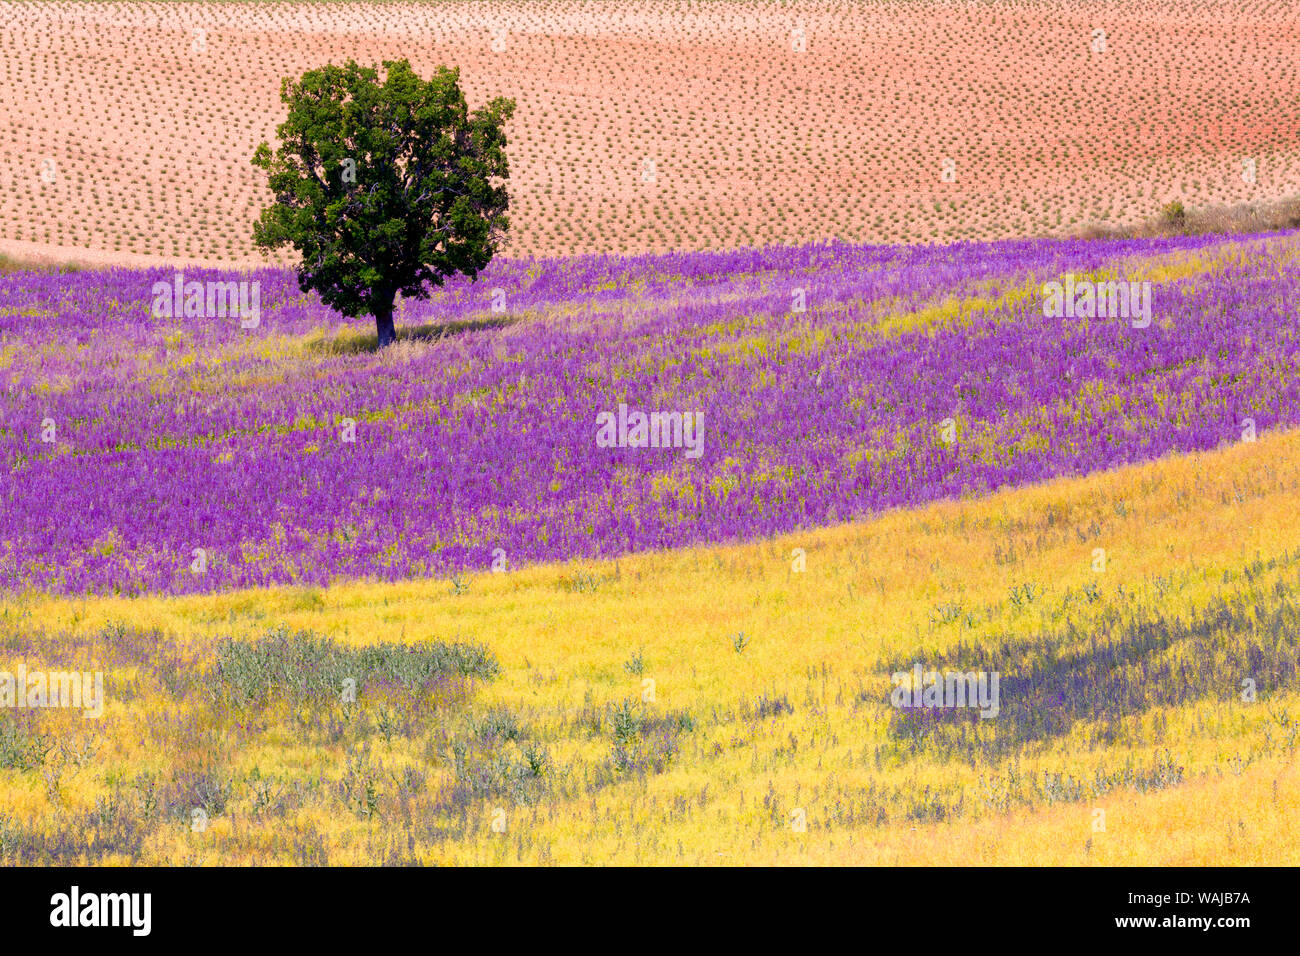 Europe, France, Provence. Lavender field in the Valensole Plateau. Credit as: Jim Nilsen / Jaynes Gallery / DanitaDelimont.com Stock Photo